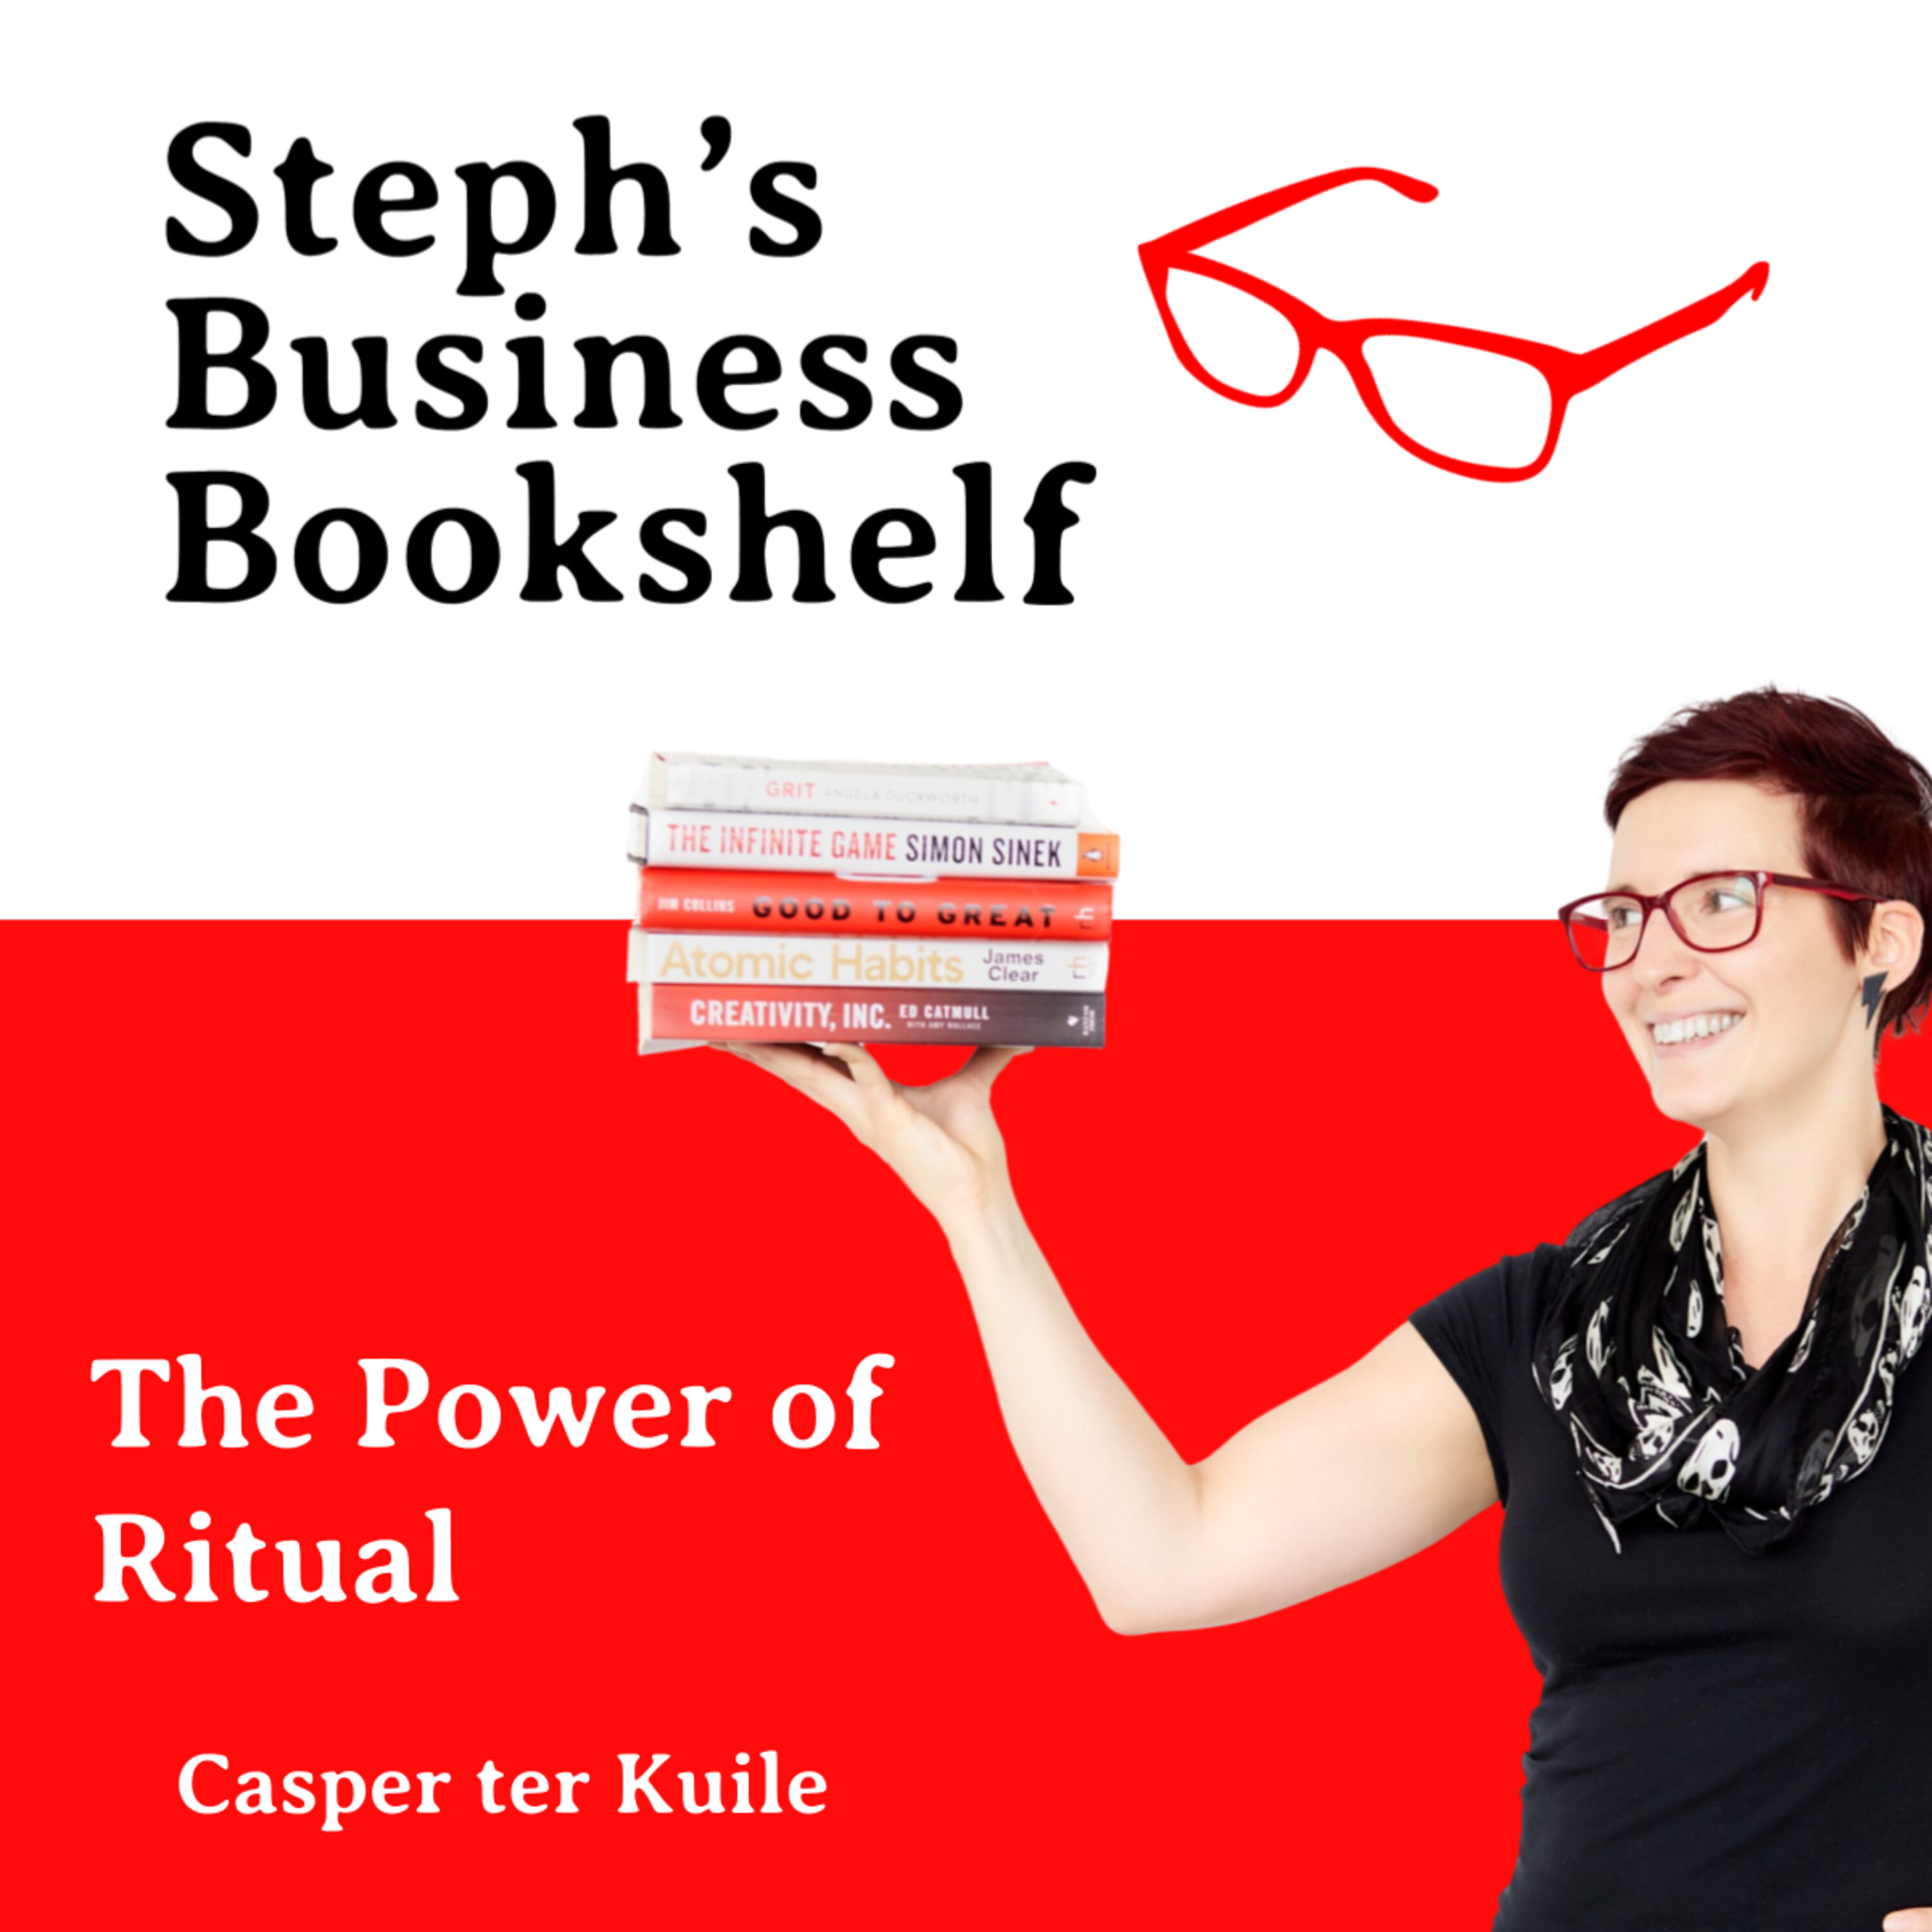 The Power of Ritual by Casper ter Kuile: how wizards and gyms will make you more spiritual